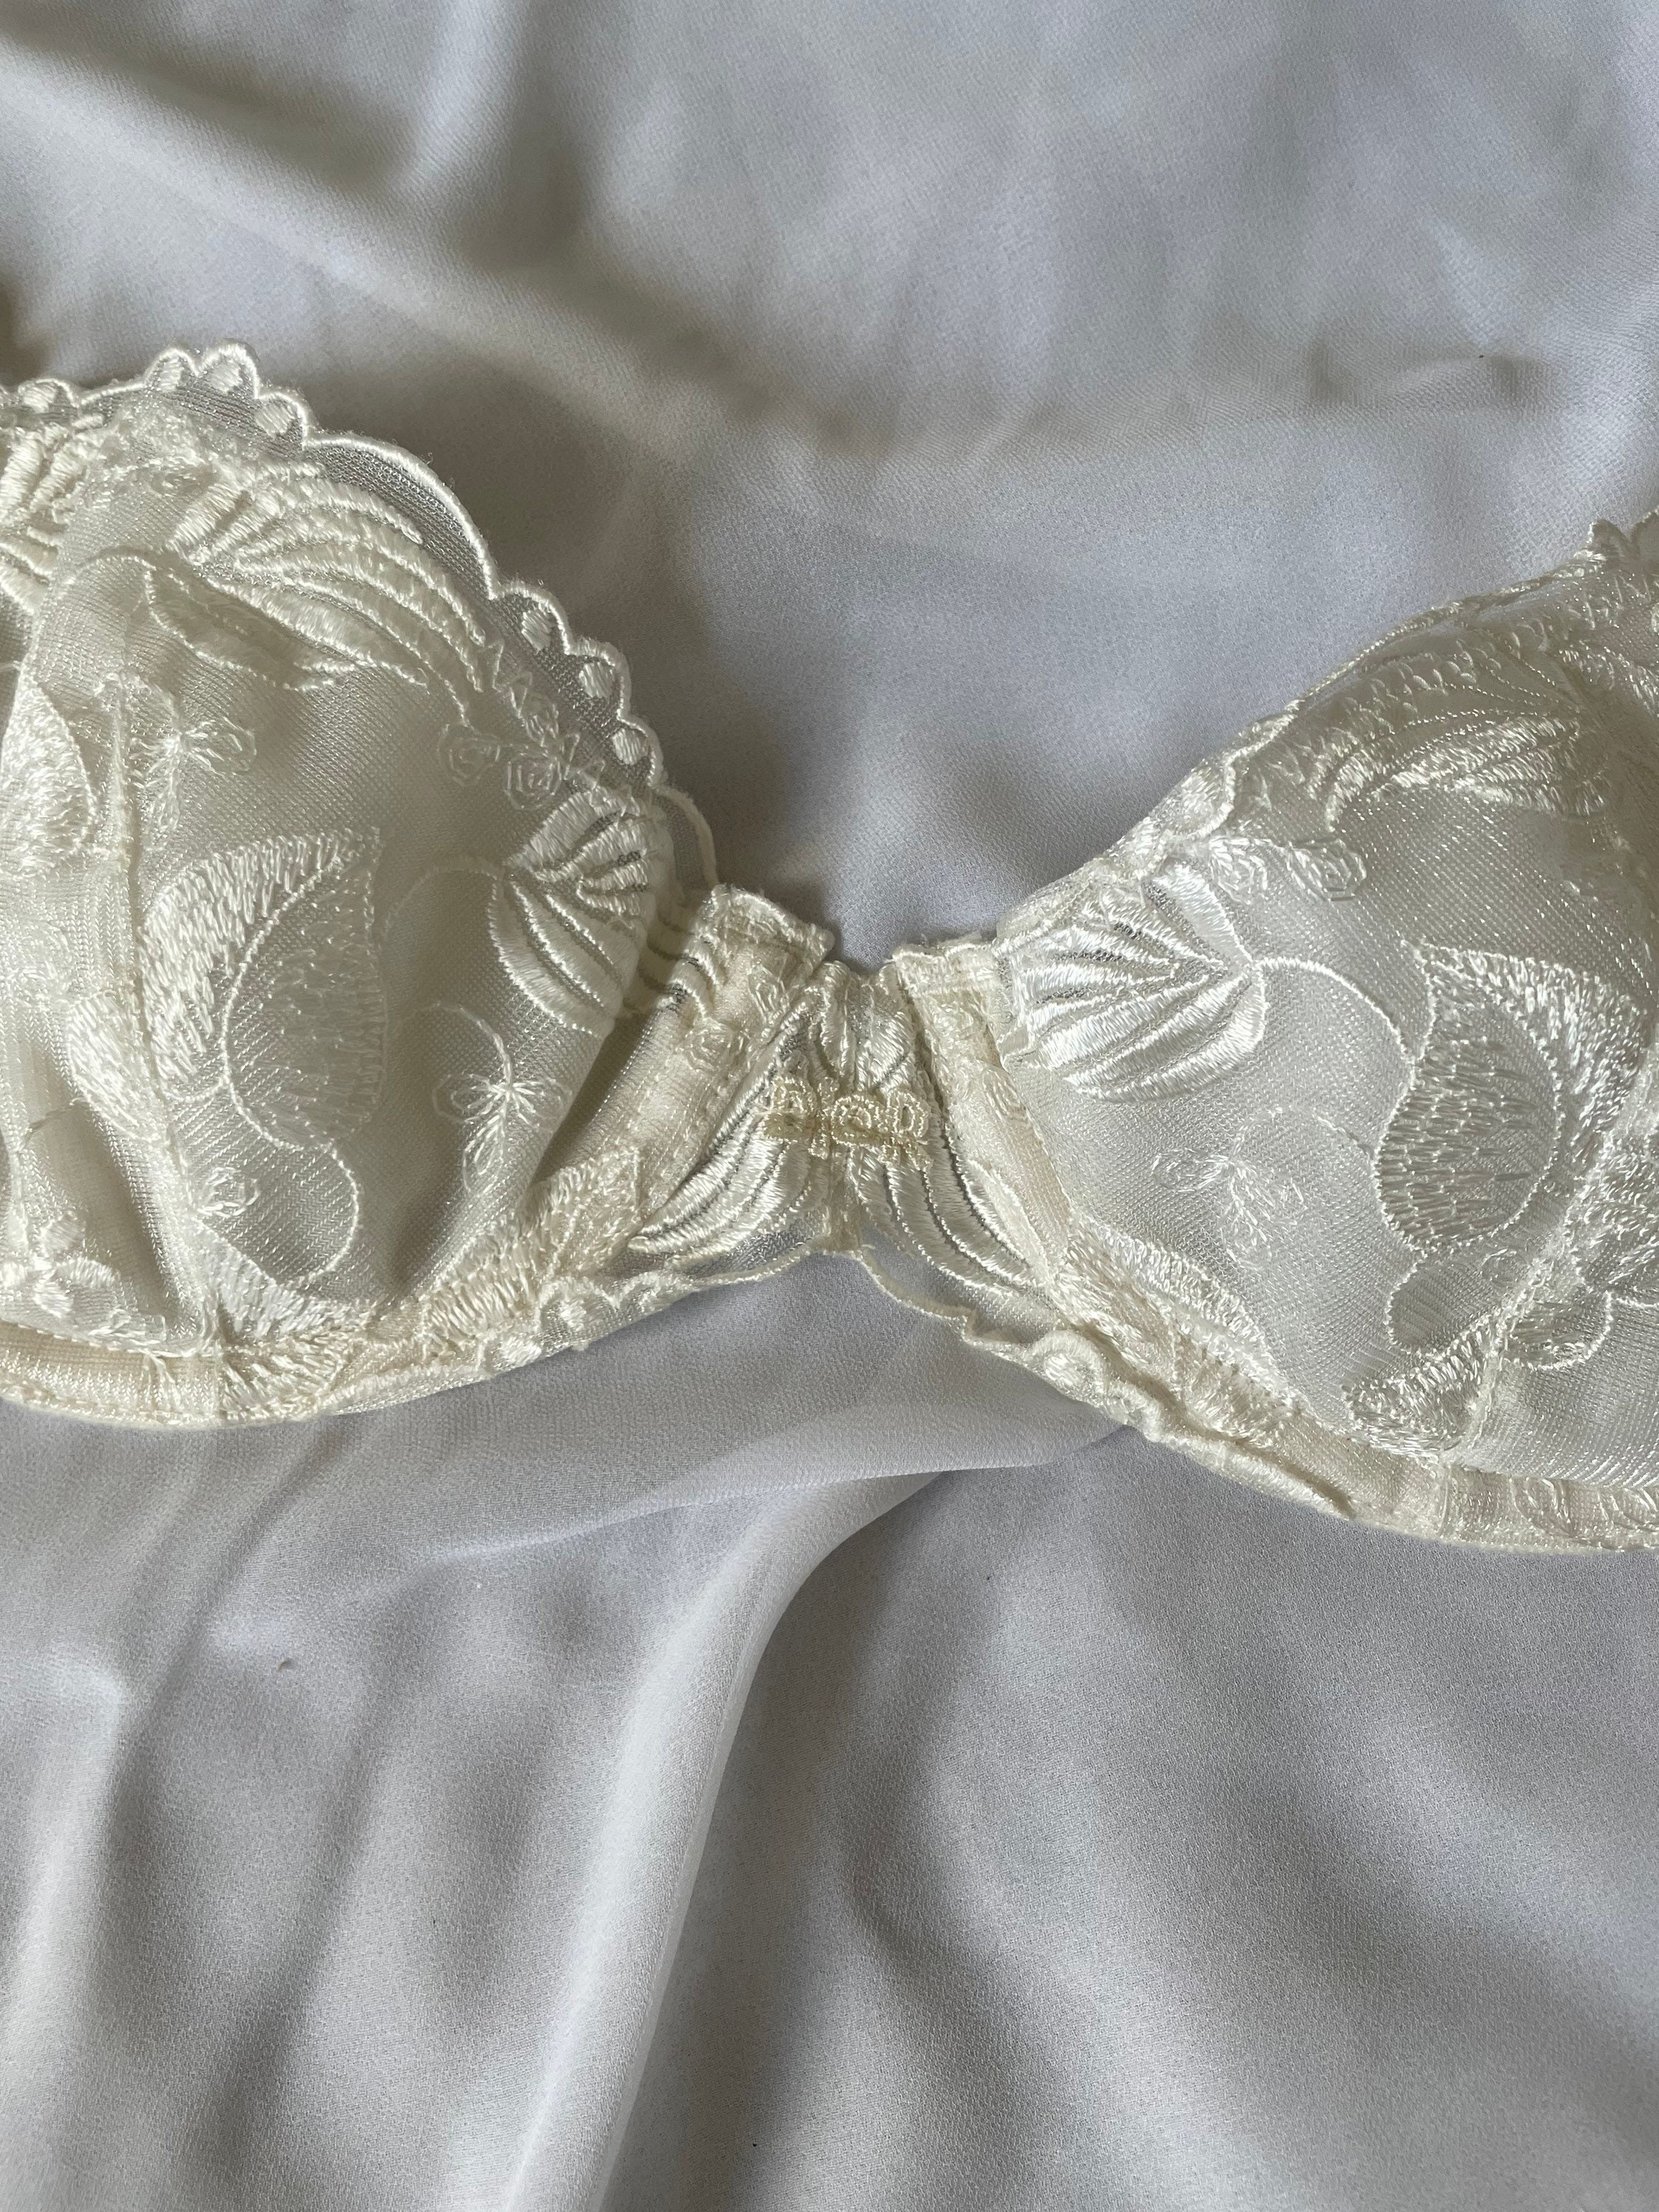 Vintage Dior Ivory Lace Bra, Size 36A 10213 -  Canada